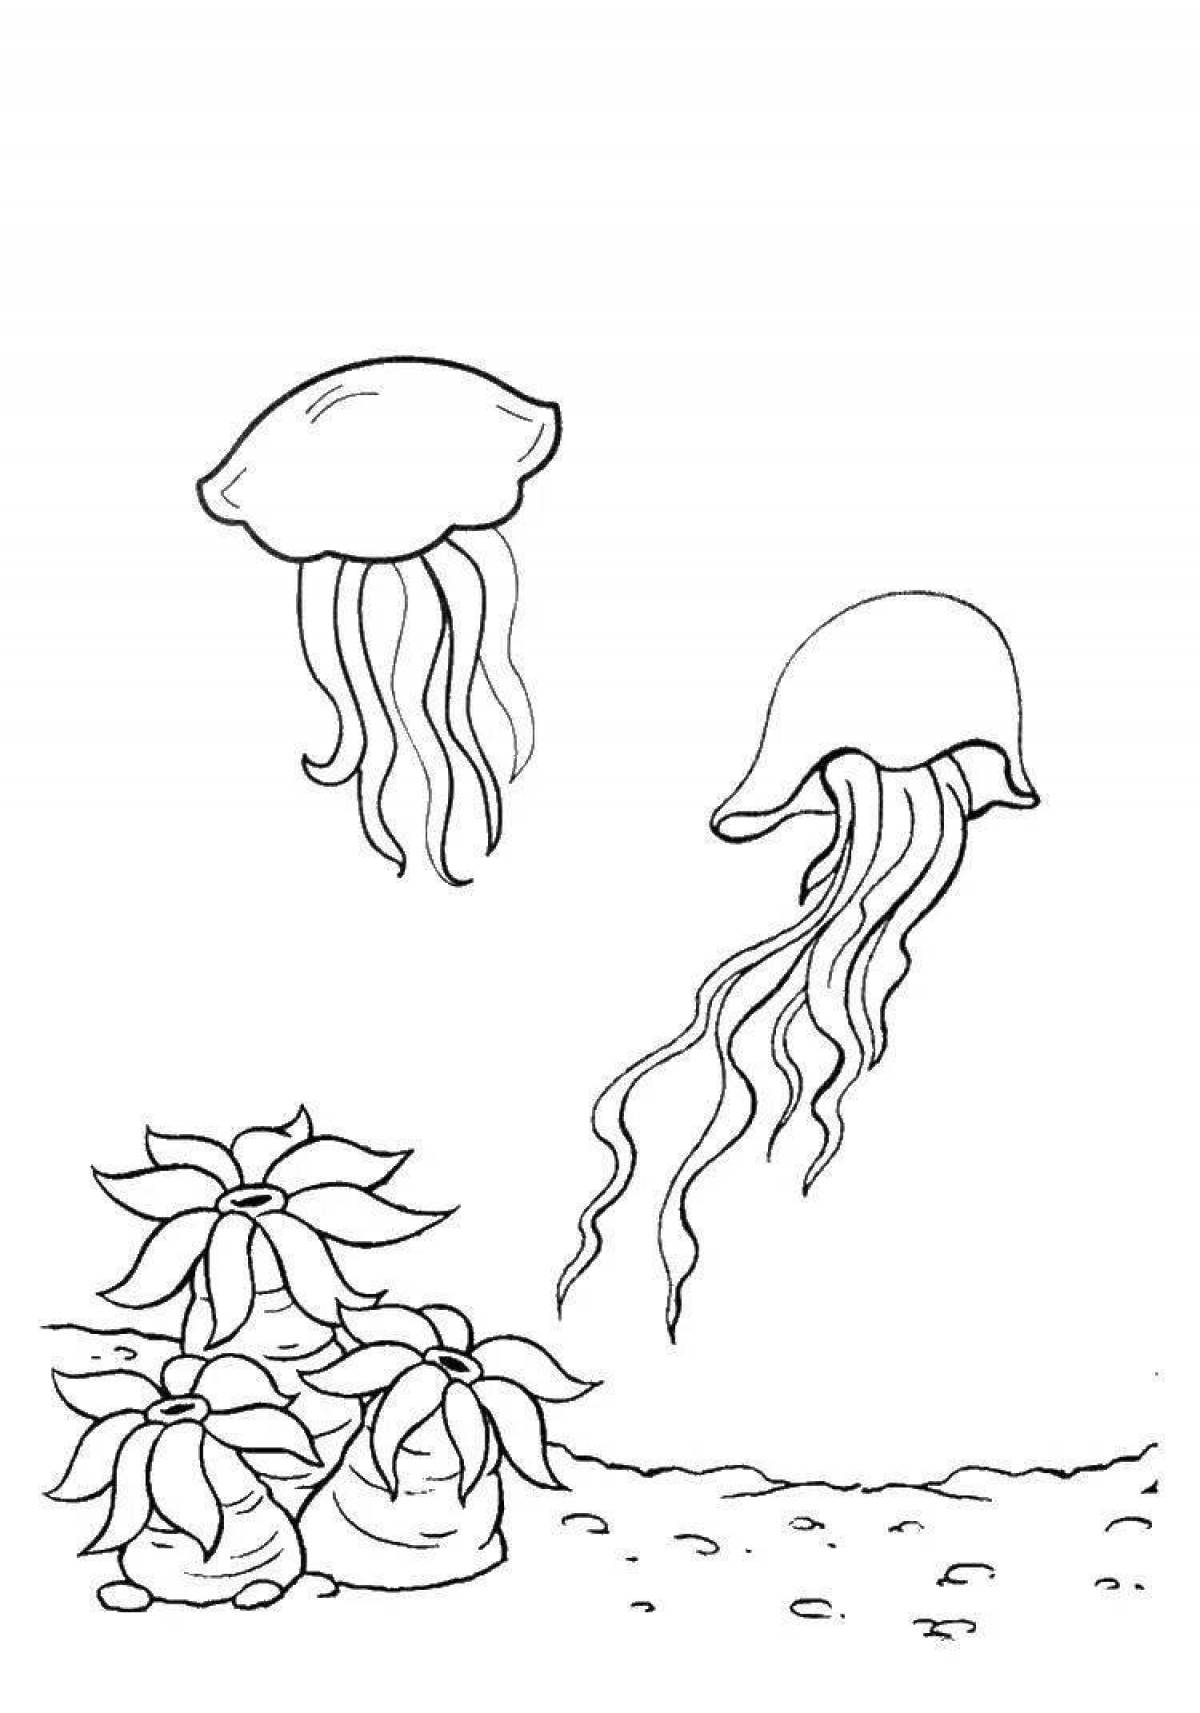 Coloring pages with colorful algae for kids